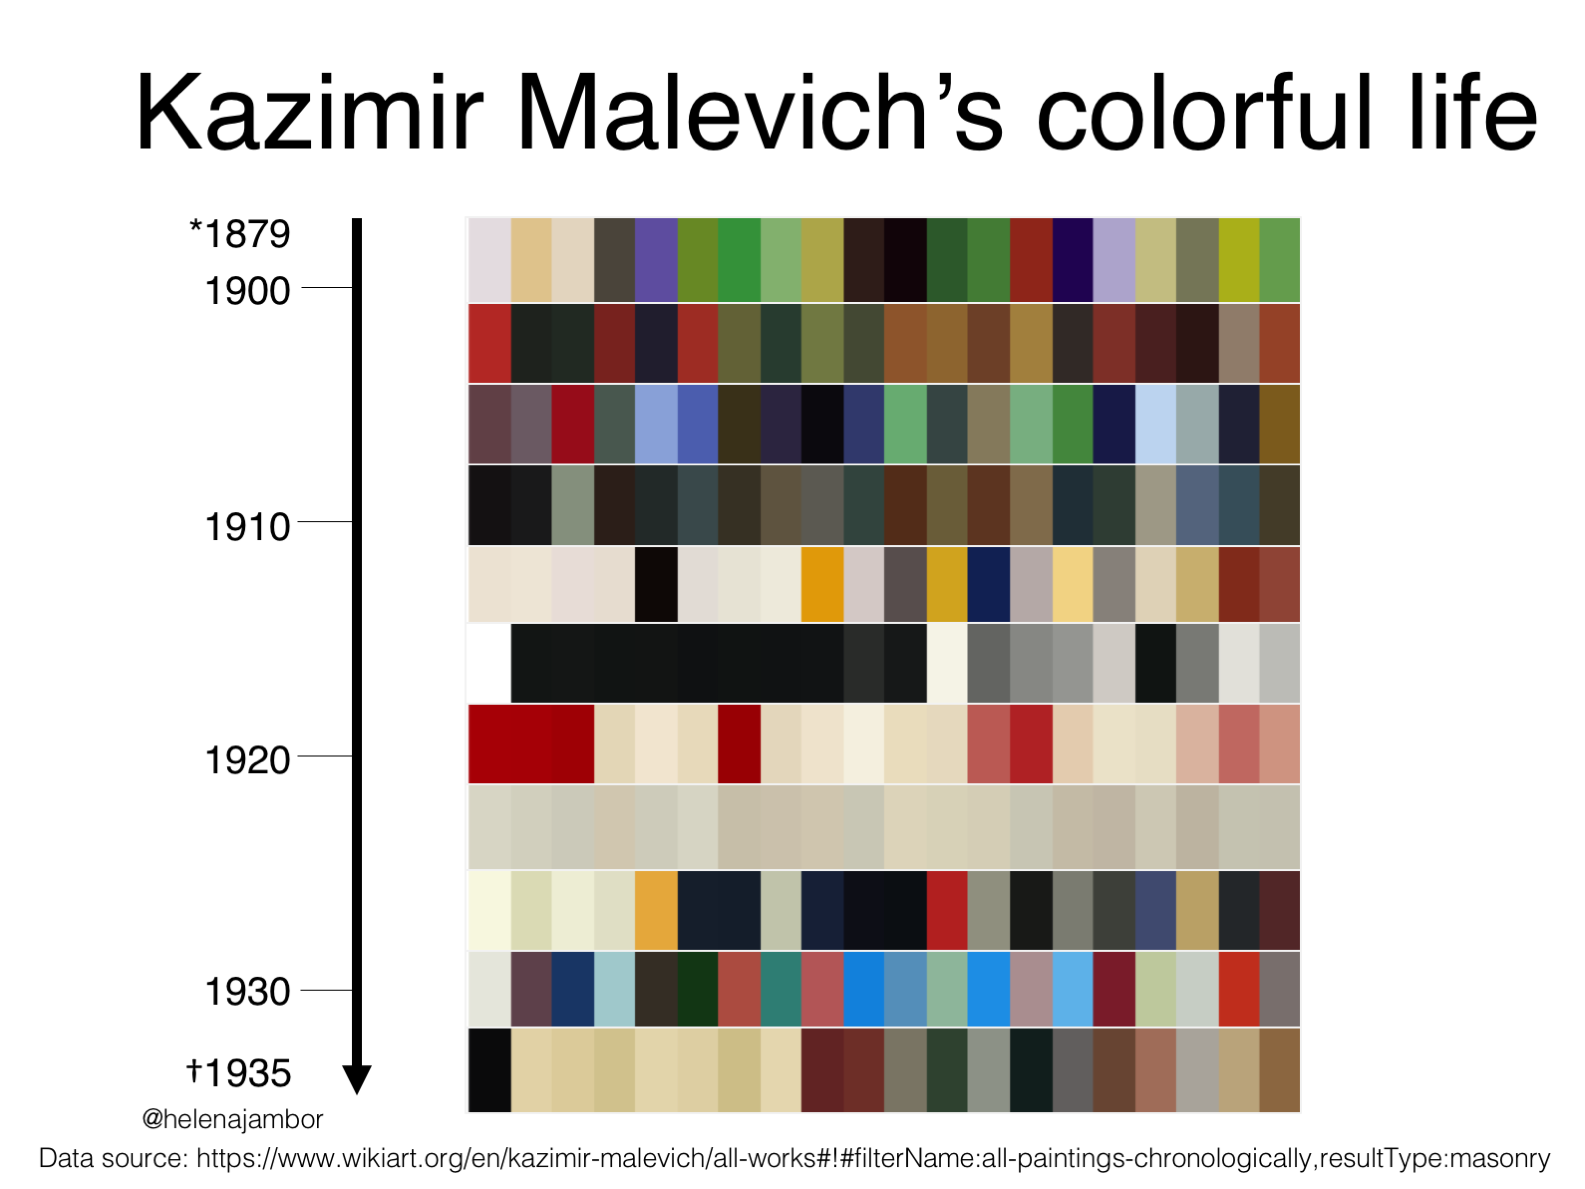 Malevich colors {colors in Malevich life time as bar charts}